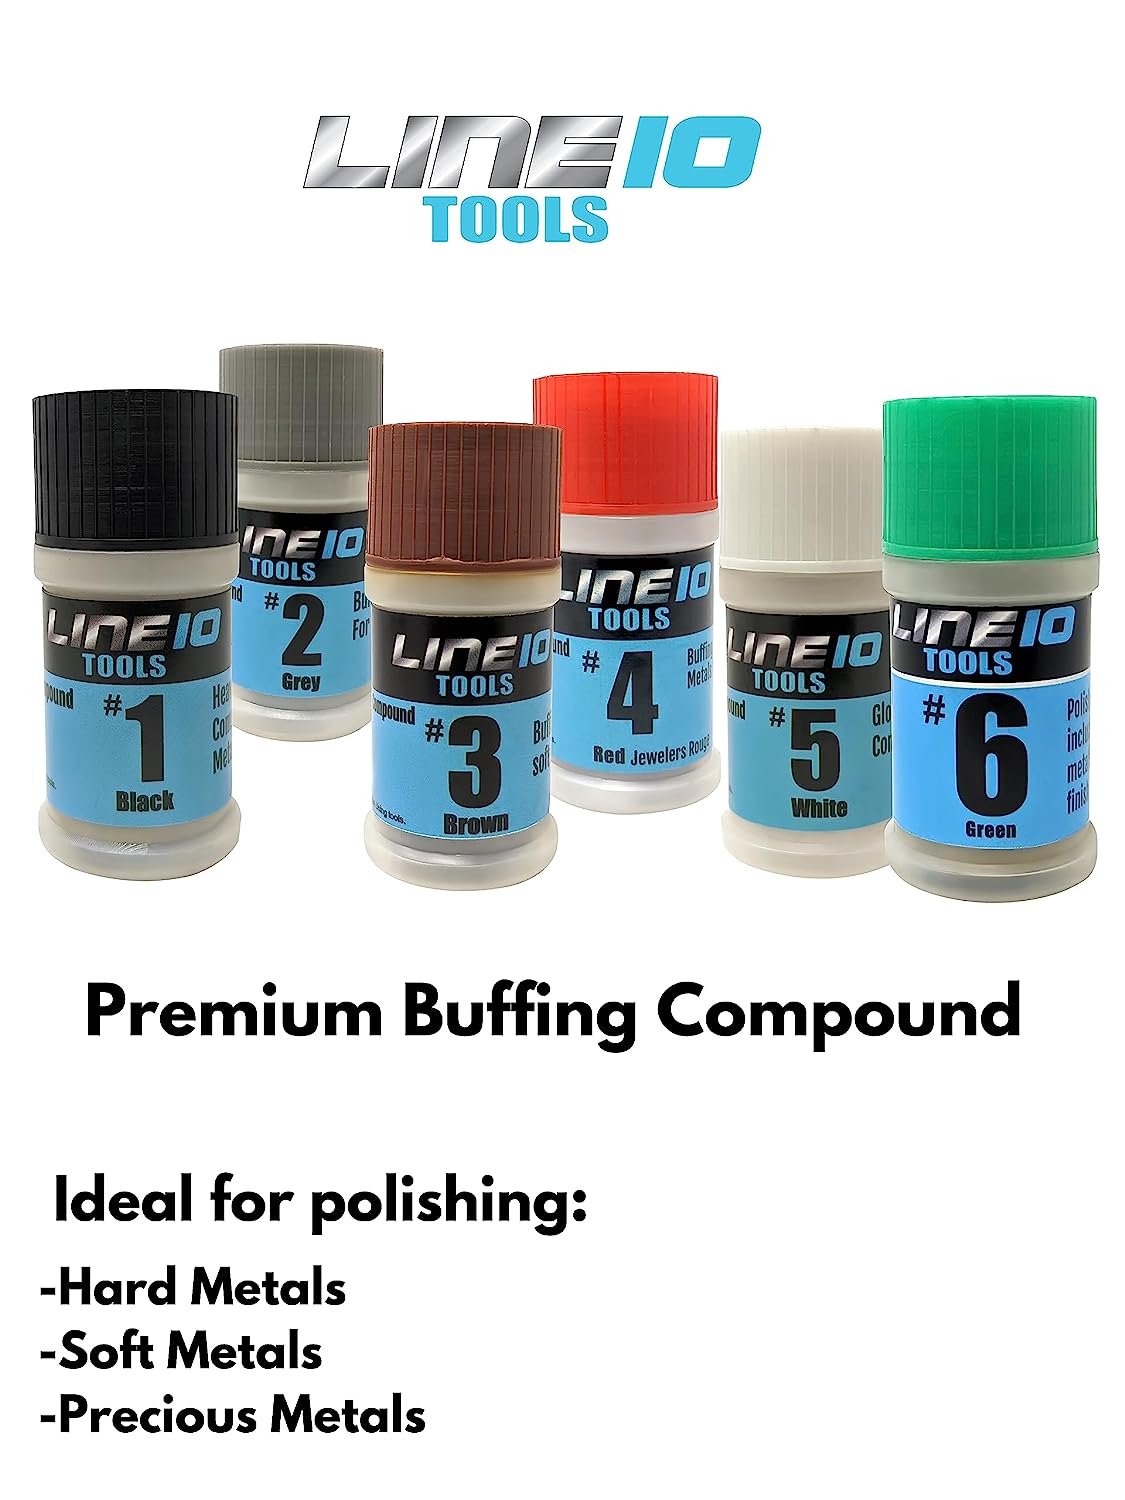 LINE10 Tools Buffing and Polishing Compound for Metal, 6pc Set